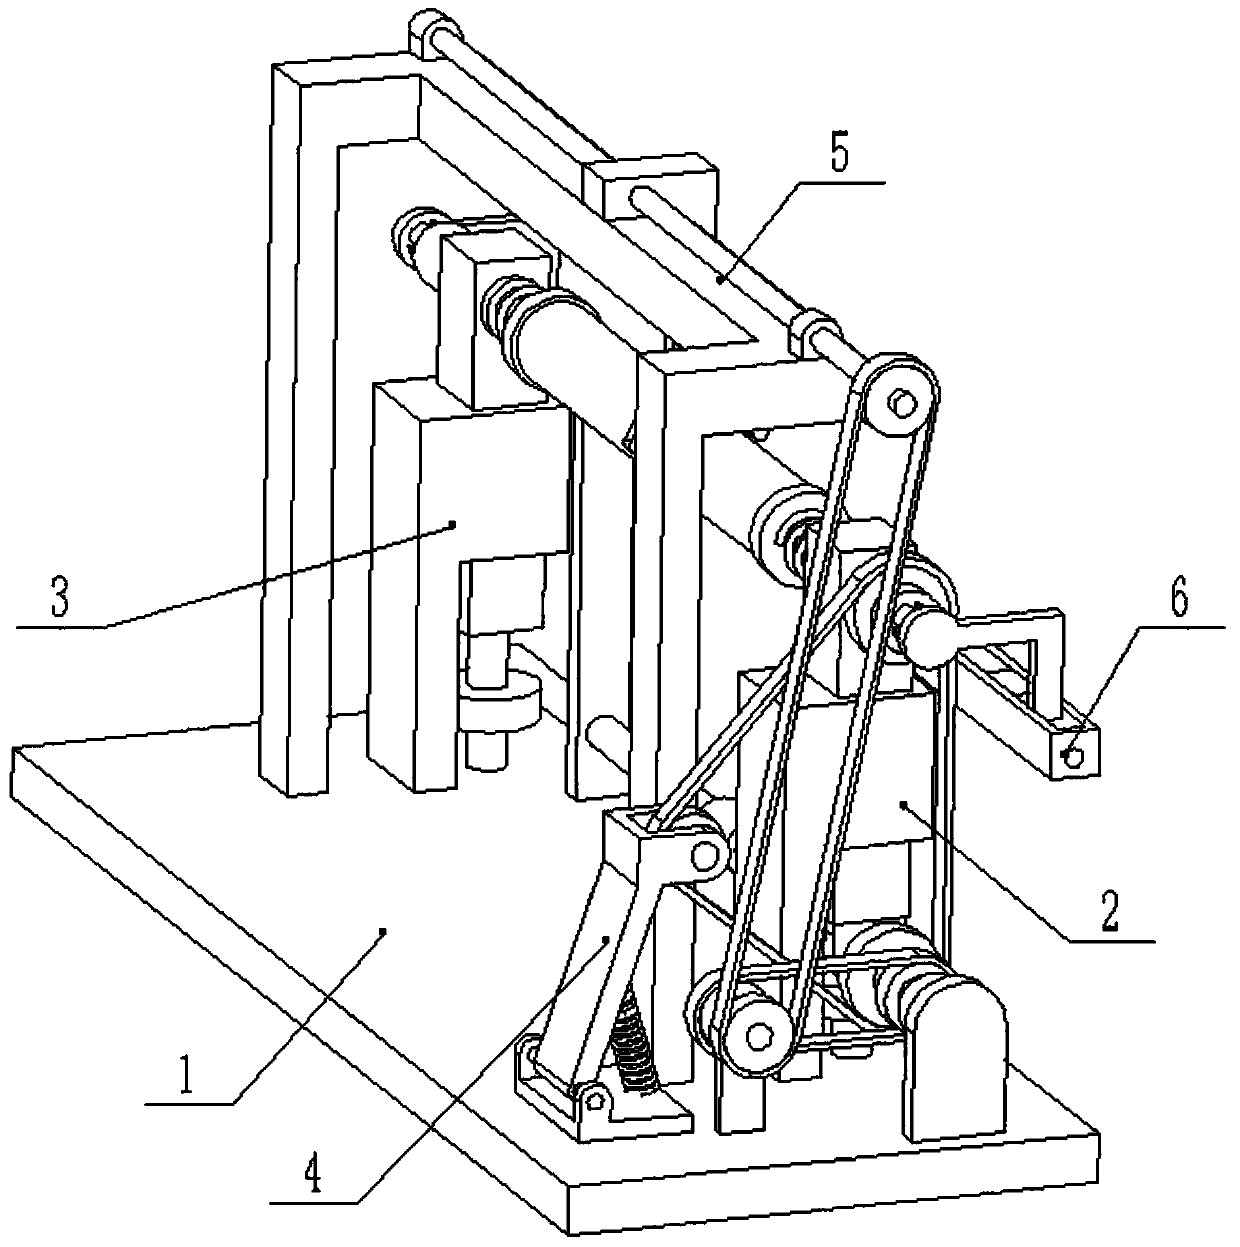 Pipe grinding device for building construction